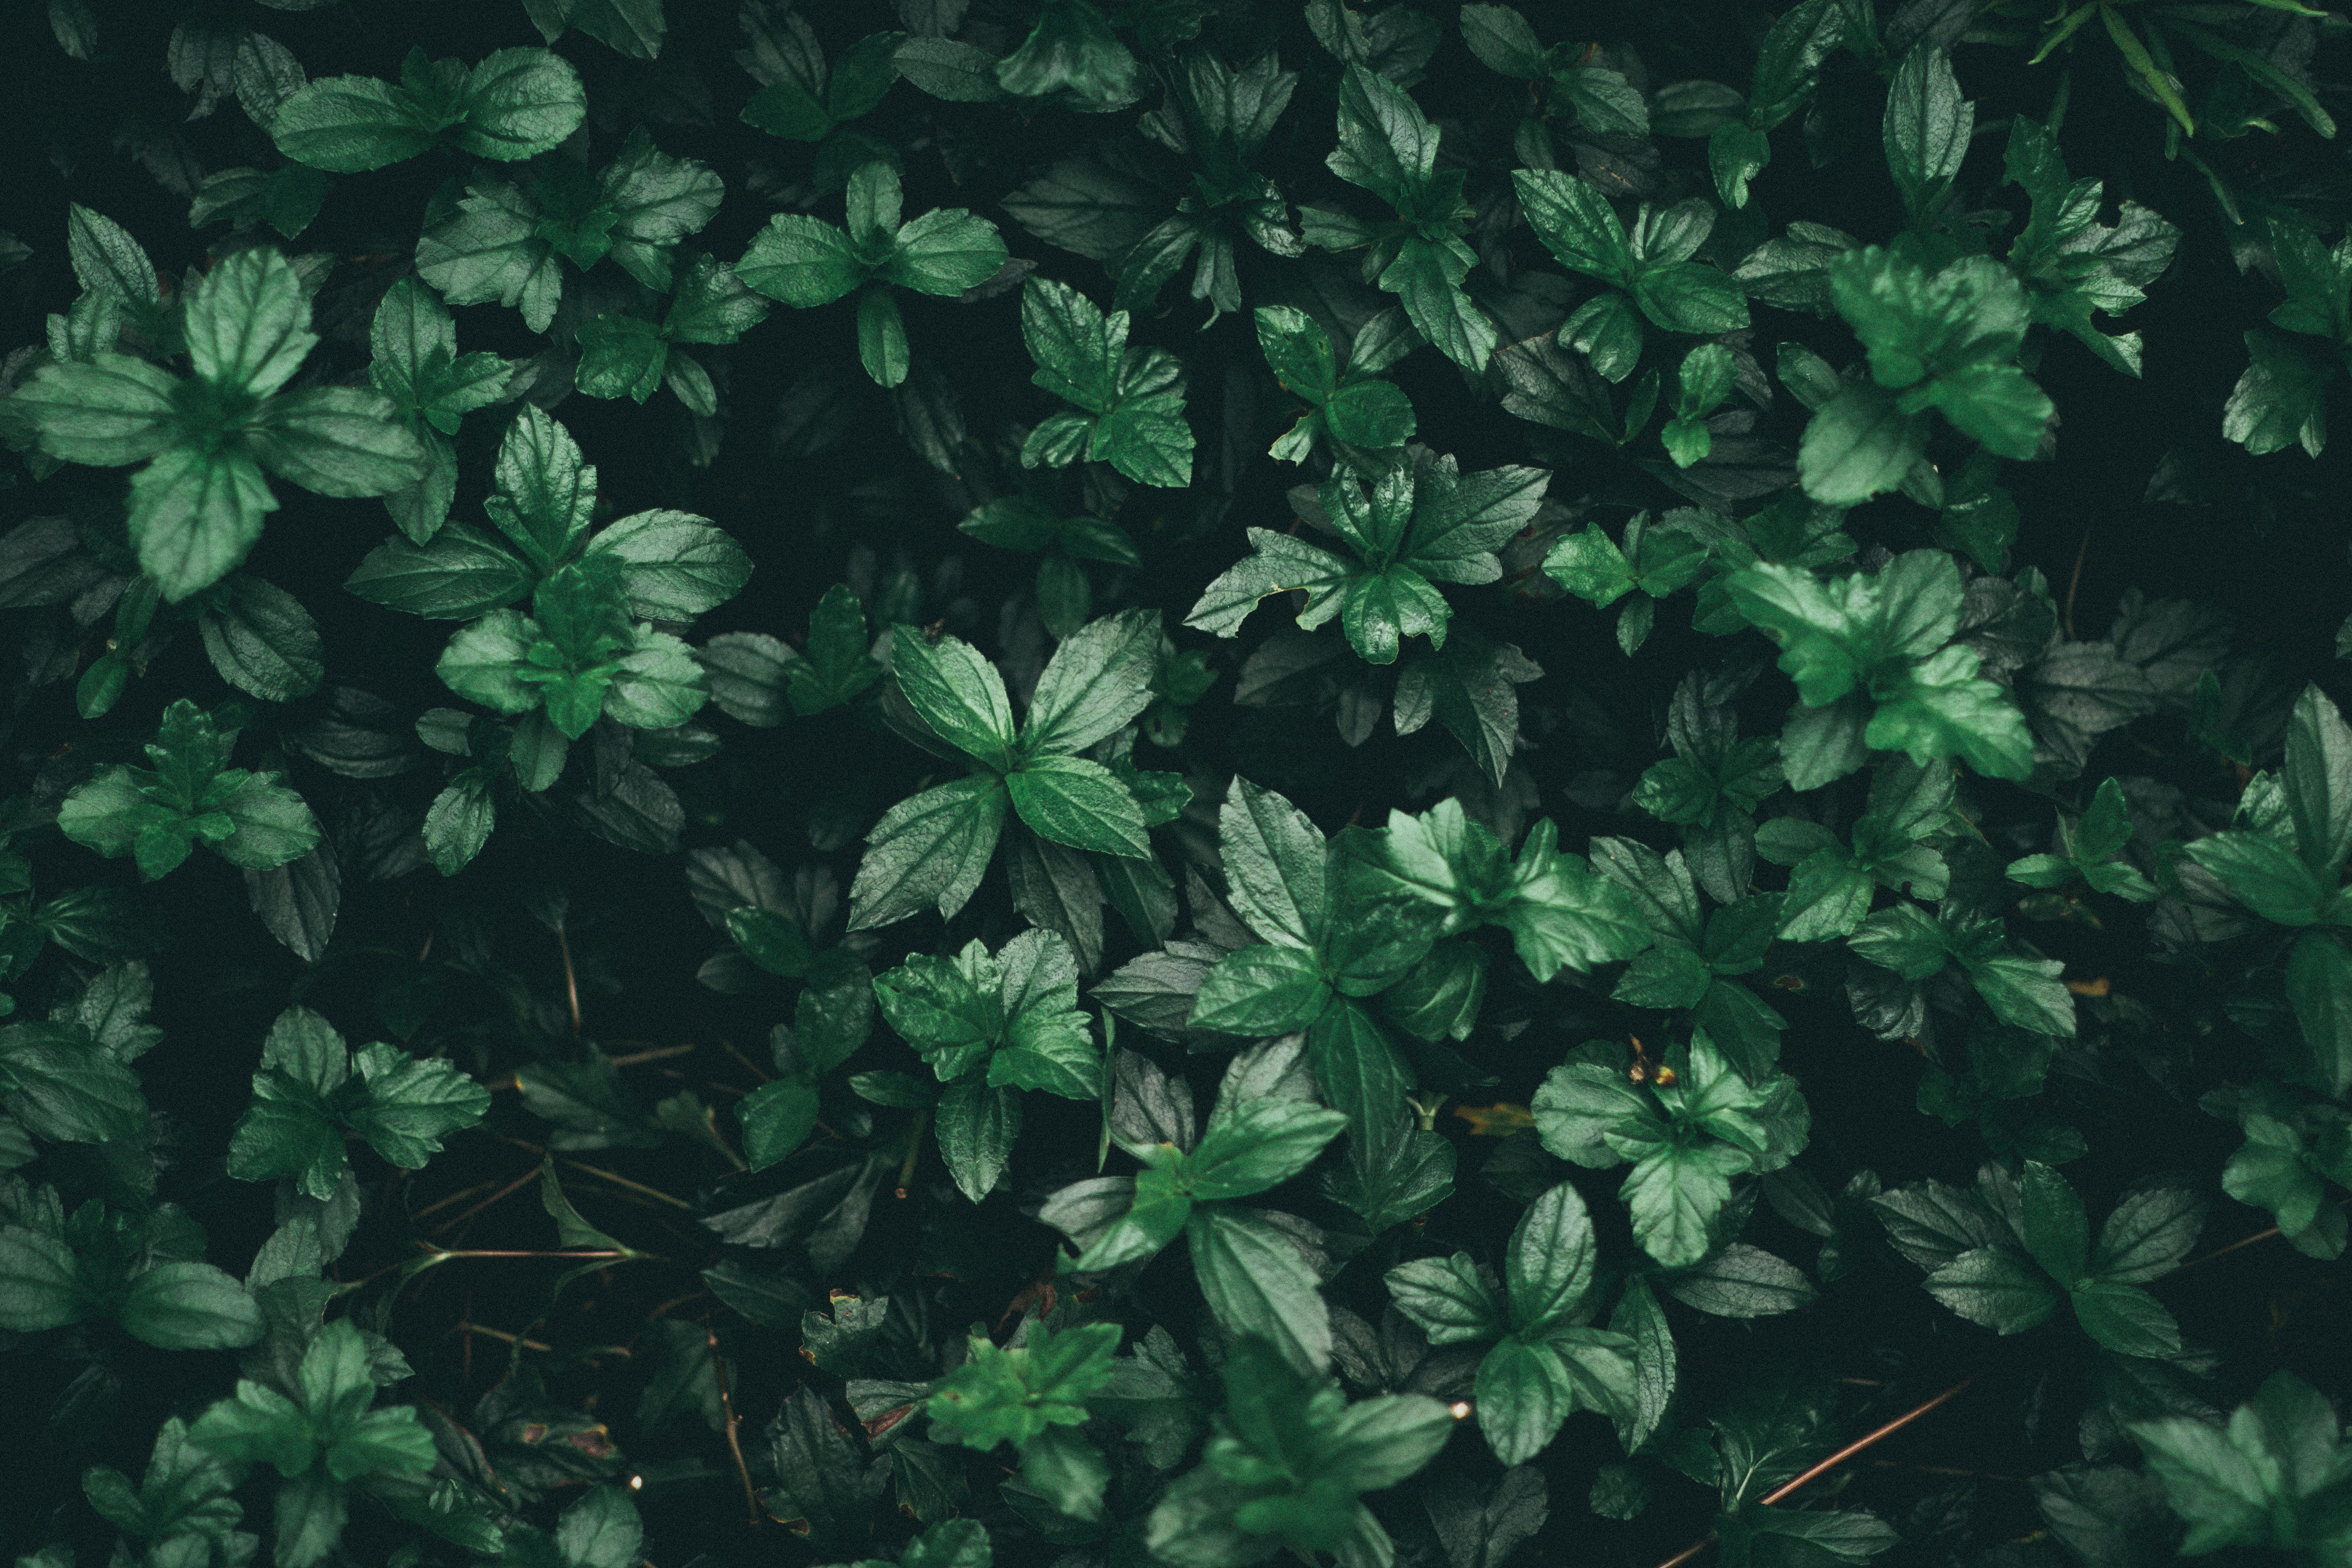 Green Aesthetic Wallpapers HD Free download 